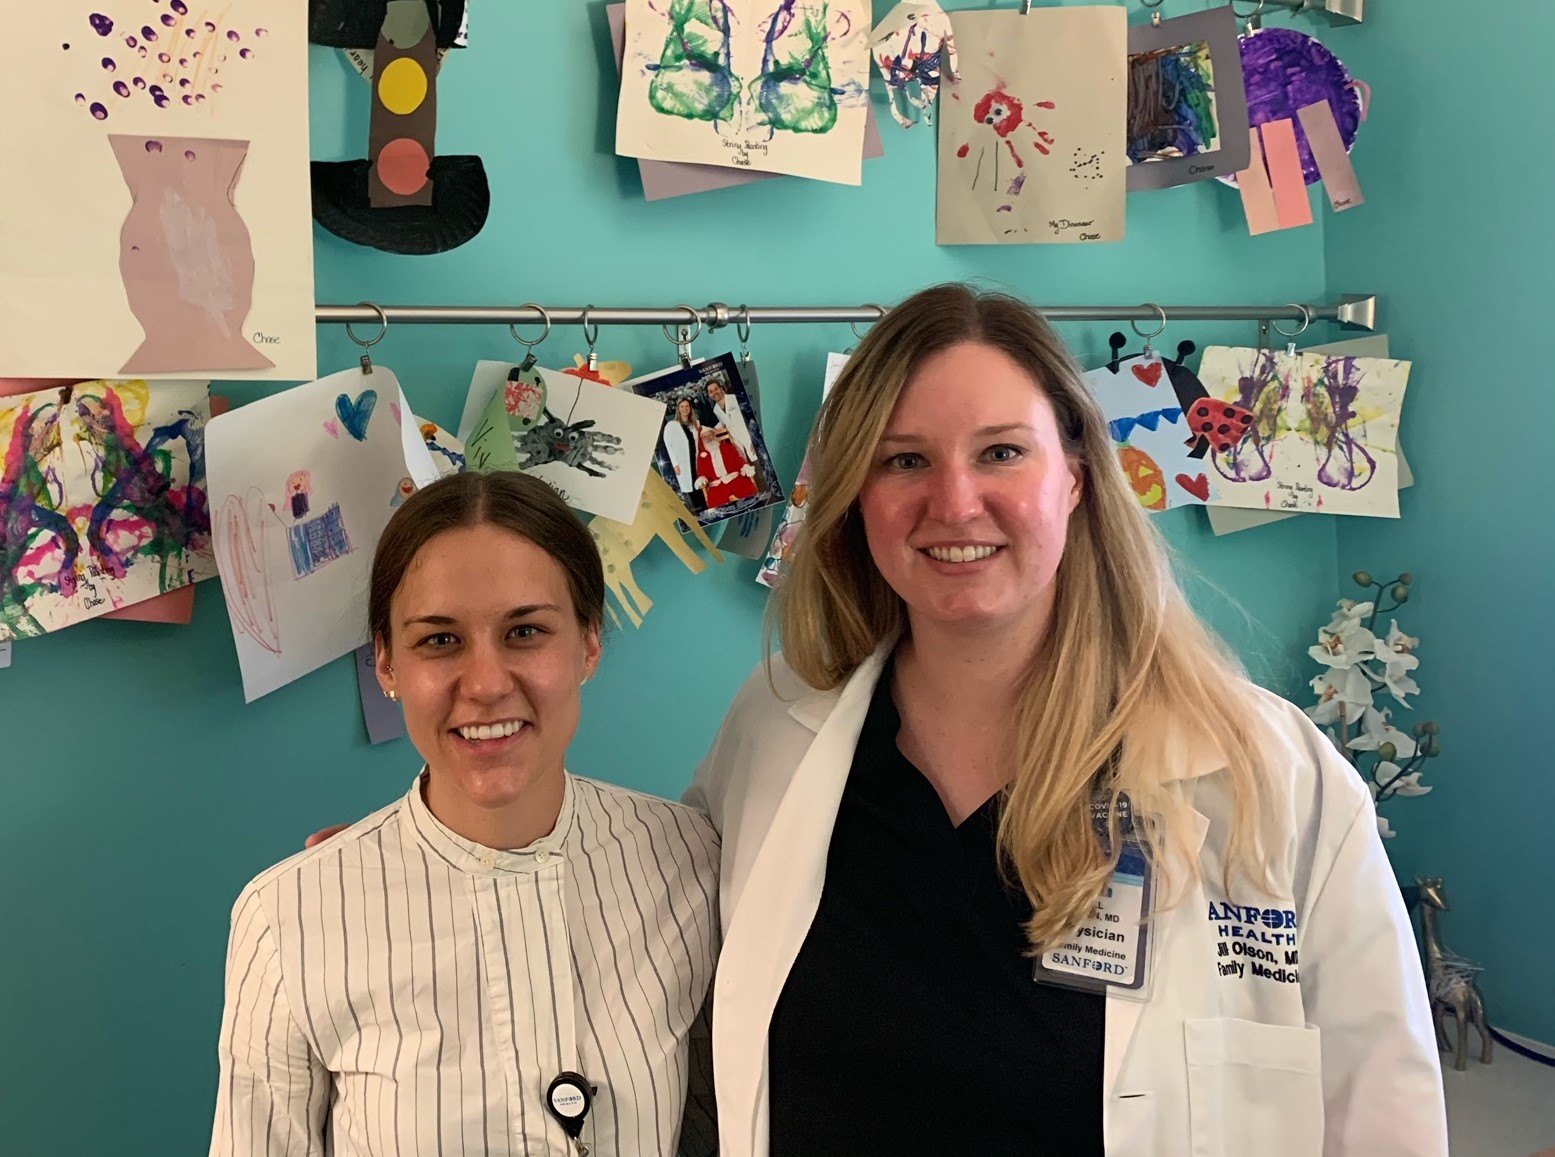 Student and preceptor in front of children's artwork